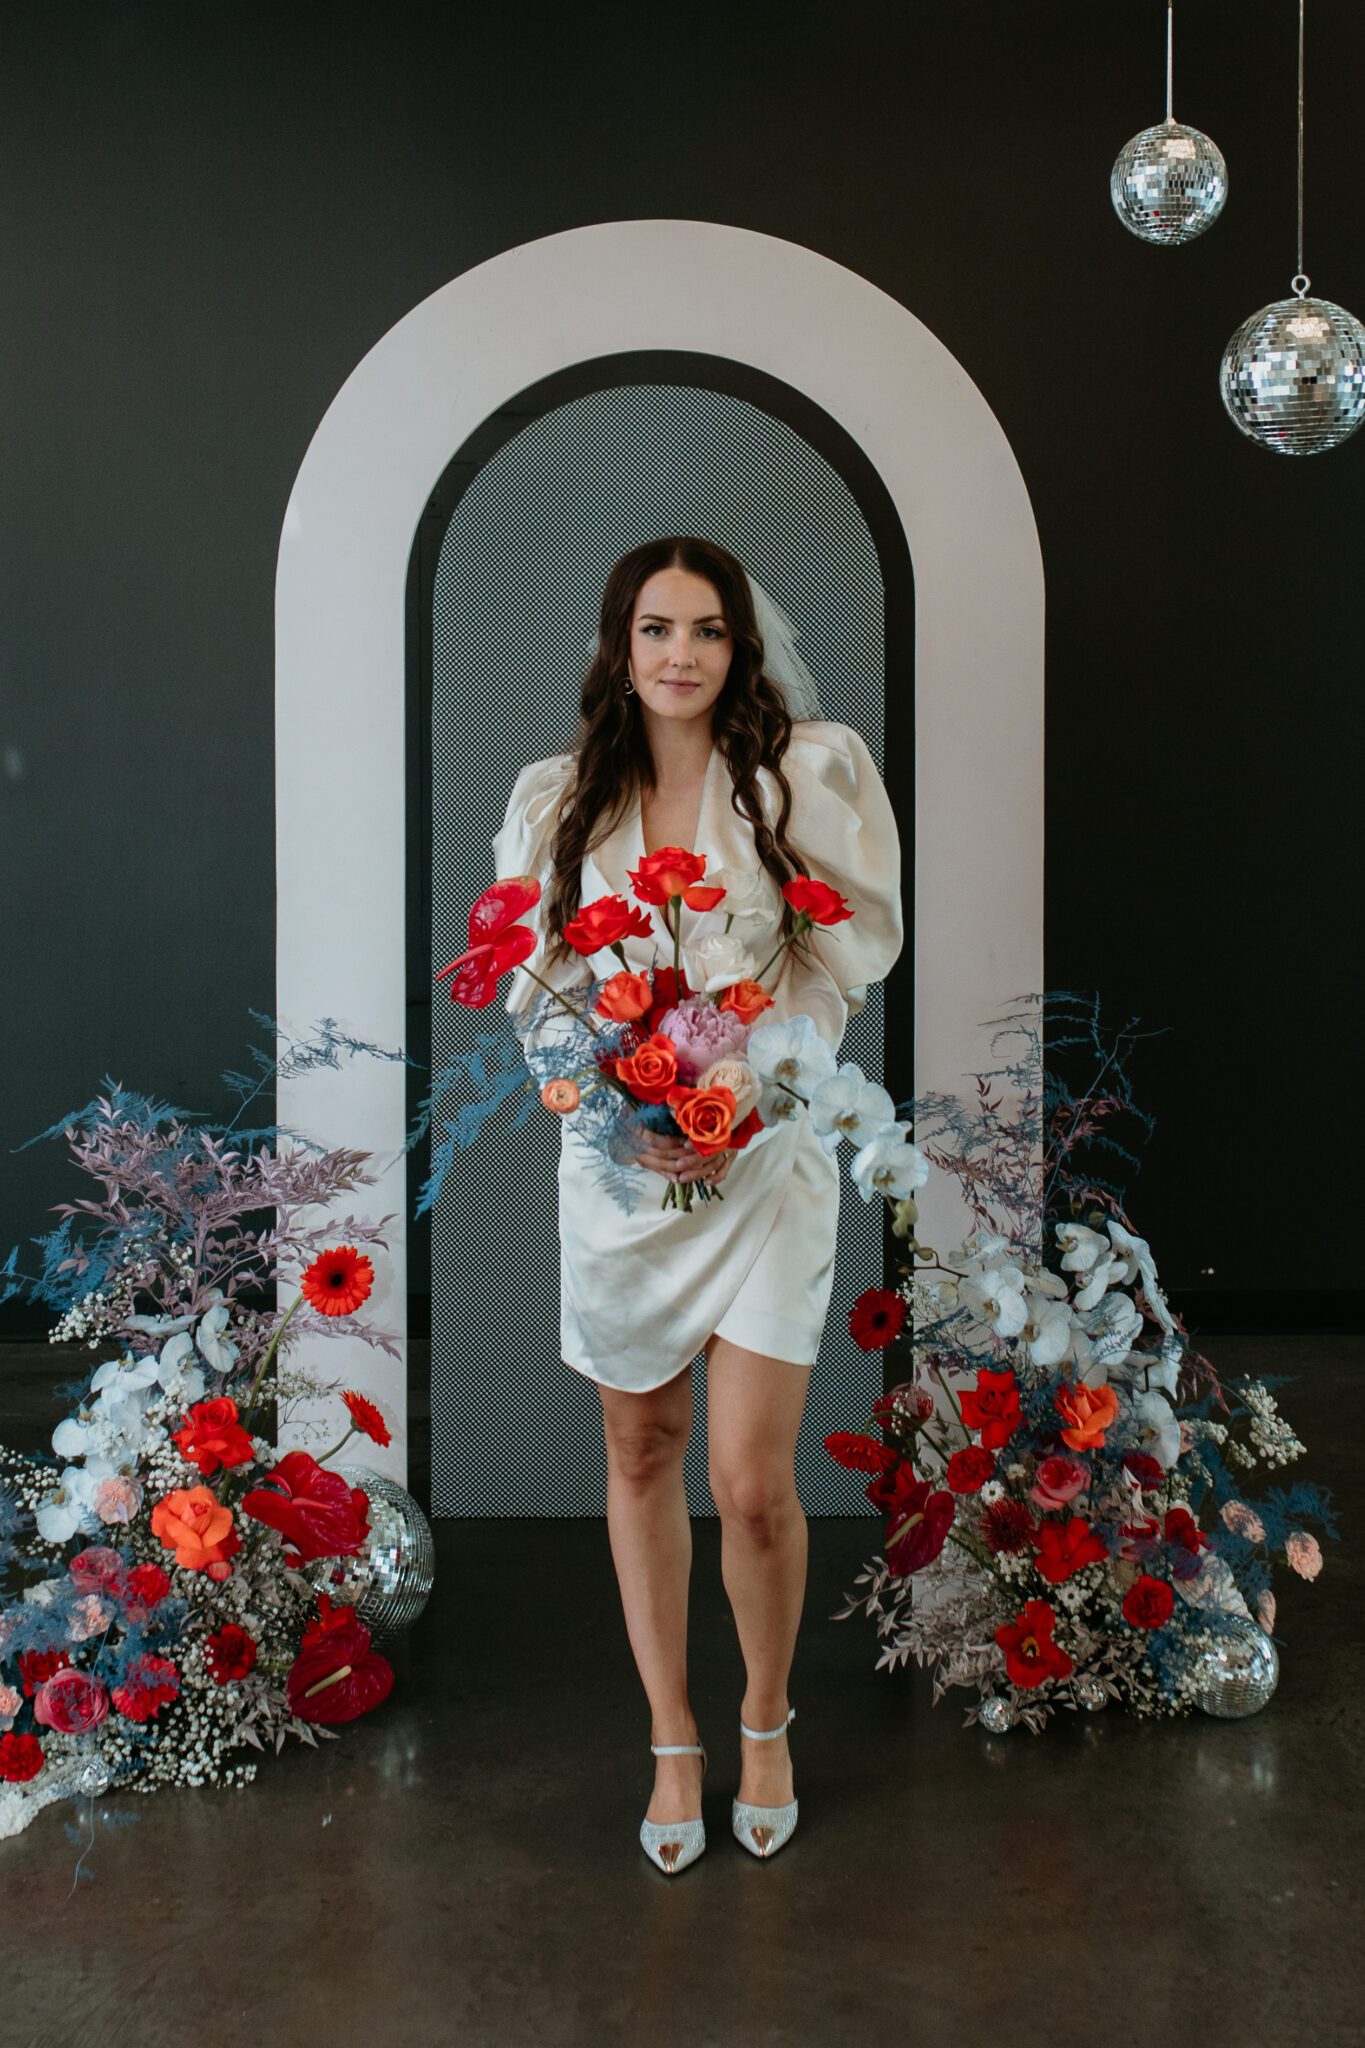 Chic bride standing in front of wedding decor seamlessly blending modern and retro styles, with eye-catching accents and retro-inspired stationery and signage contributing to the overall stylish atmosphere.